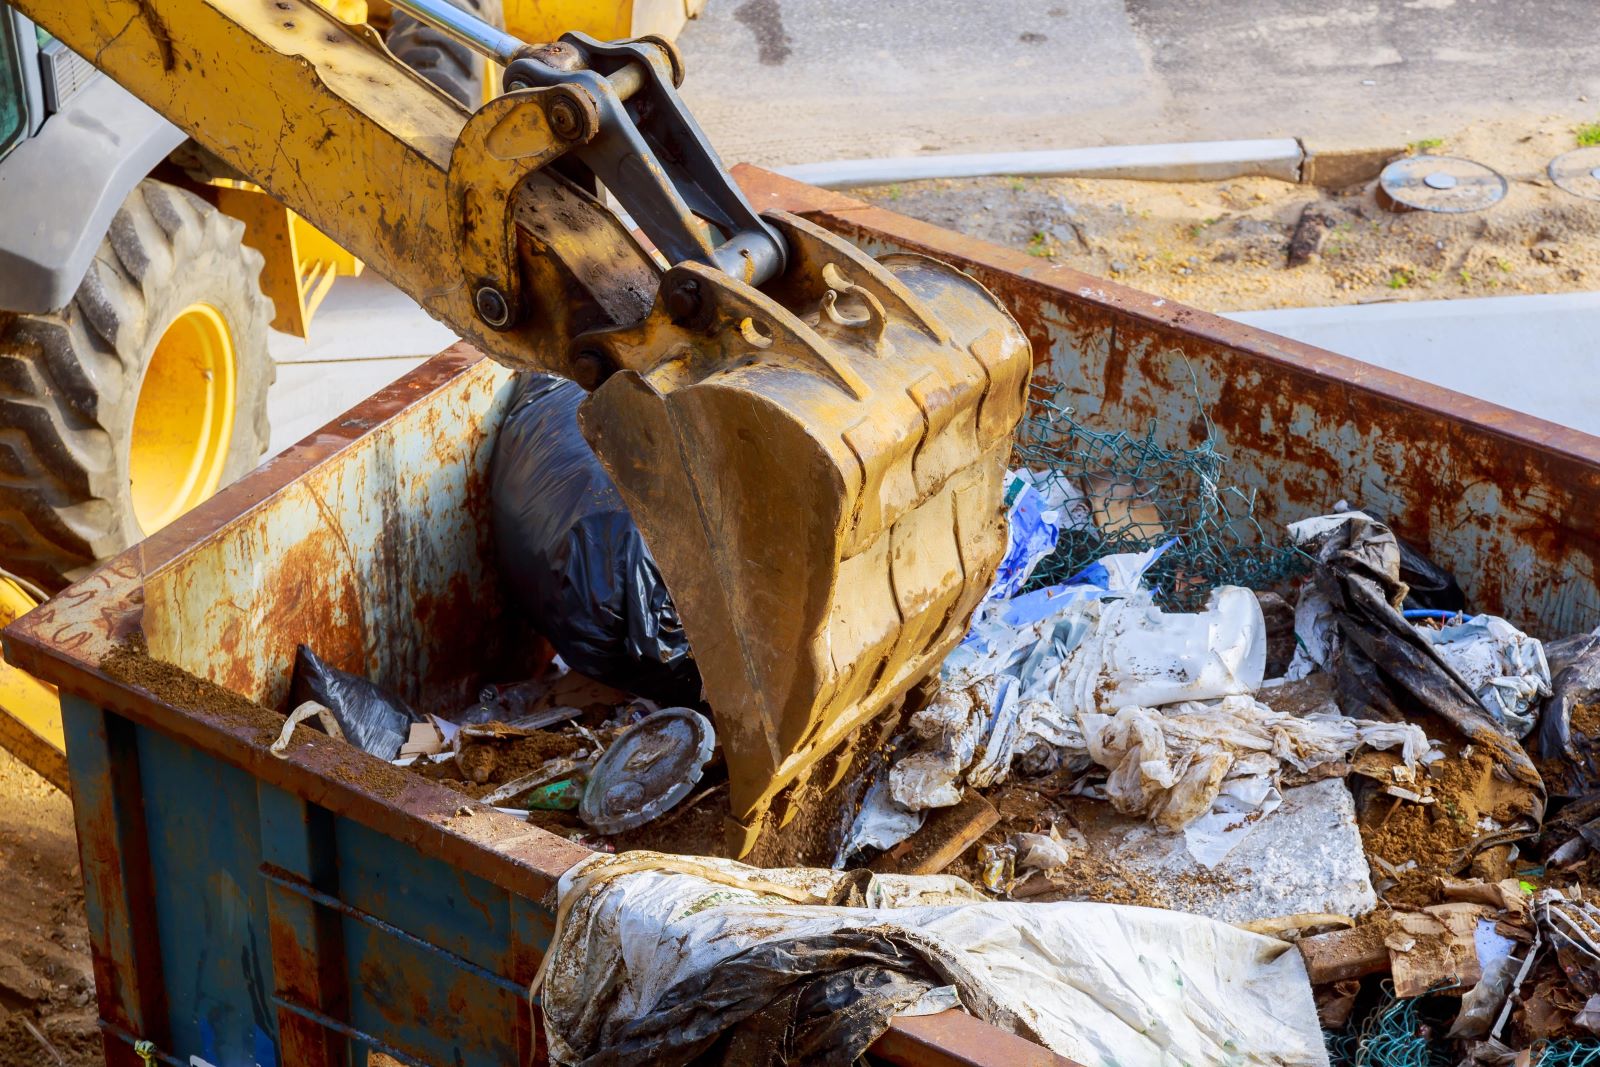 waste disposal companies in south Africa